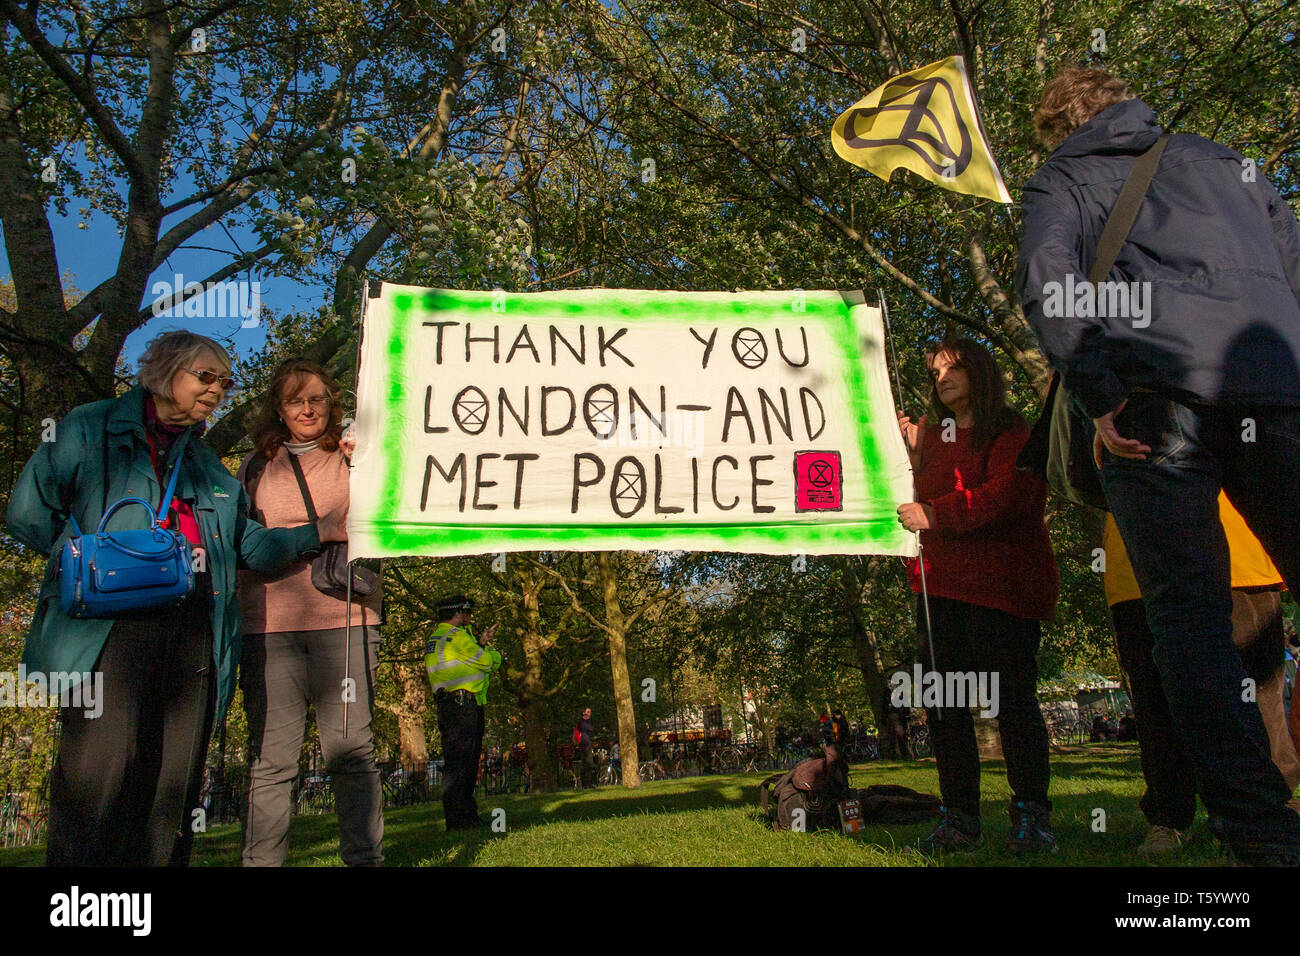 A sign at the Closing Ceremony of the Extinction Rebellion demonstration on April 25th 2019 at Marble Arch, London, thanking the Metropolitan Police Stock Photo